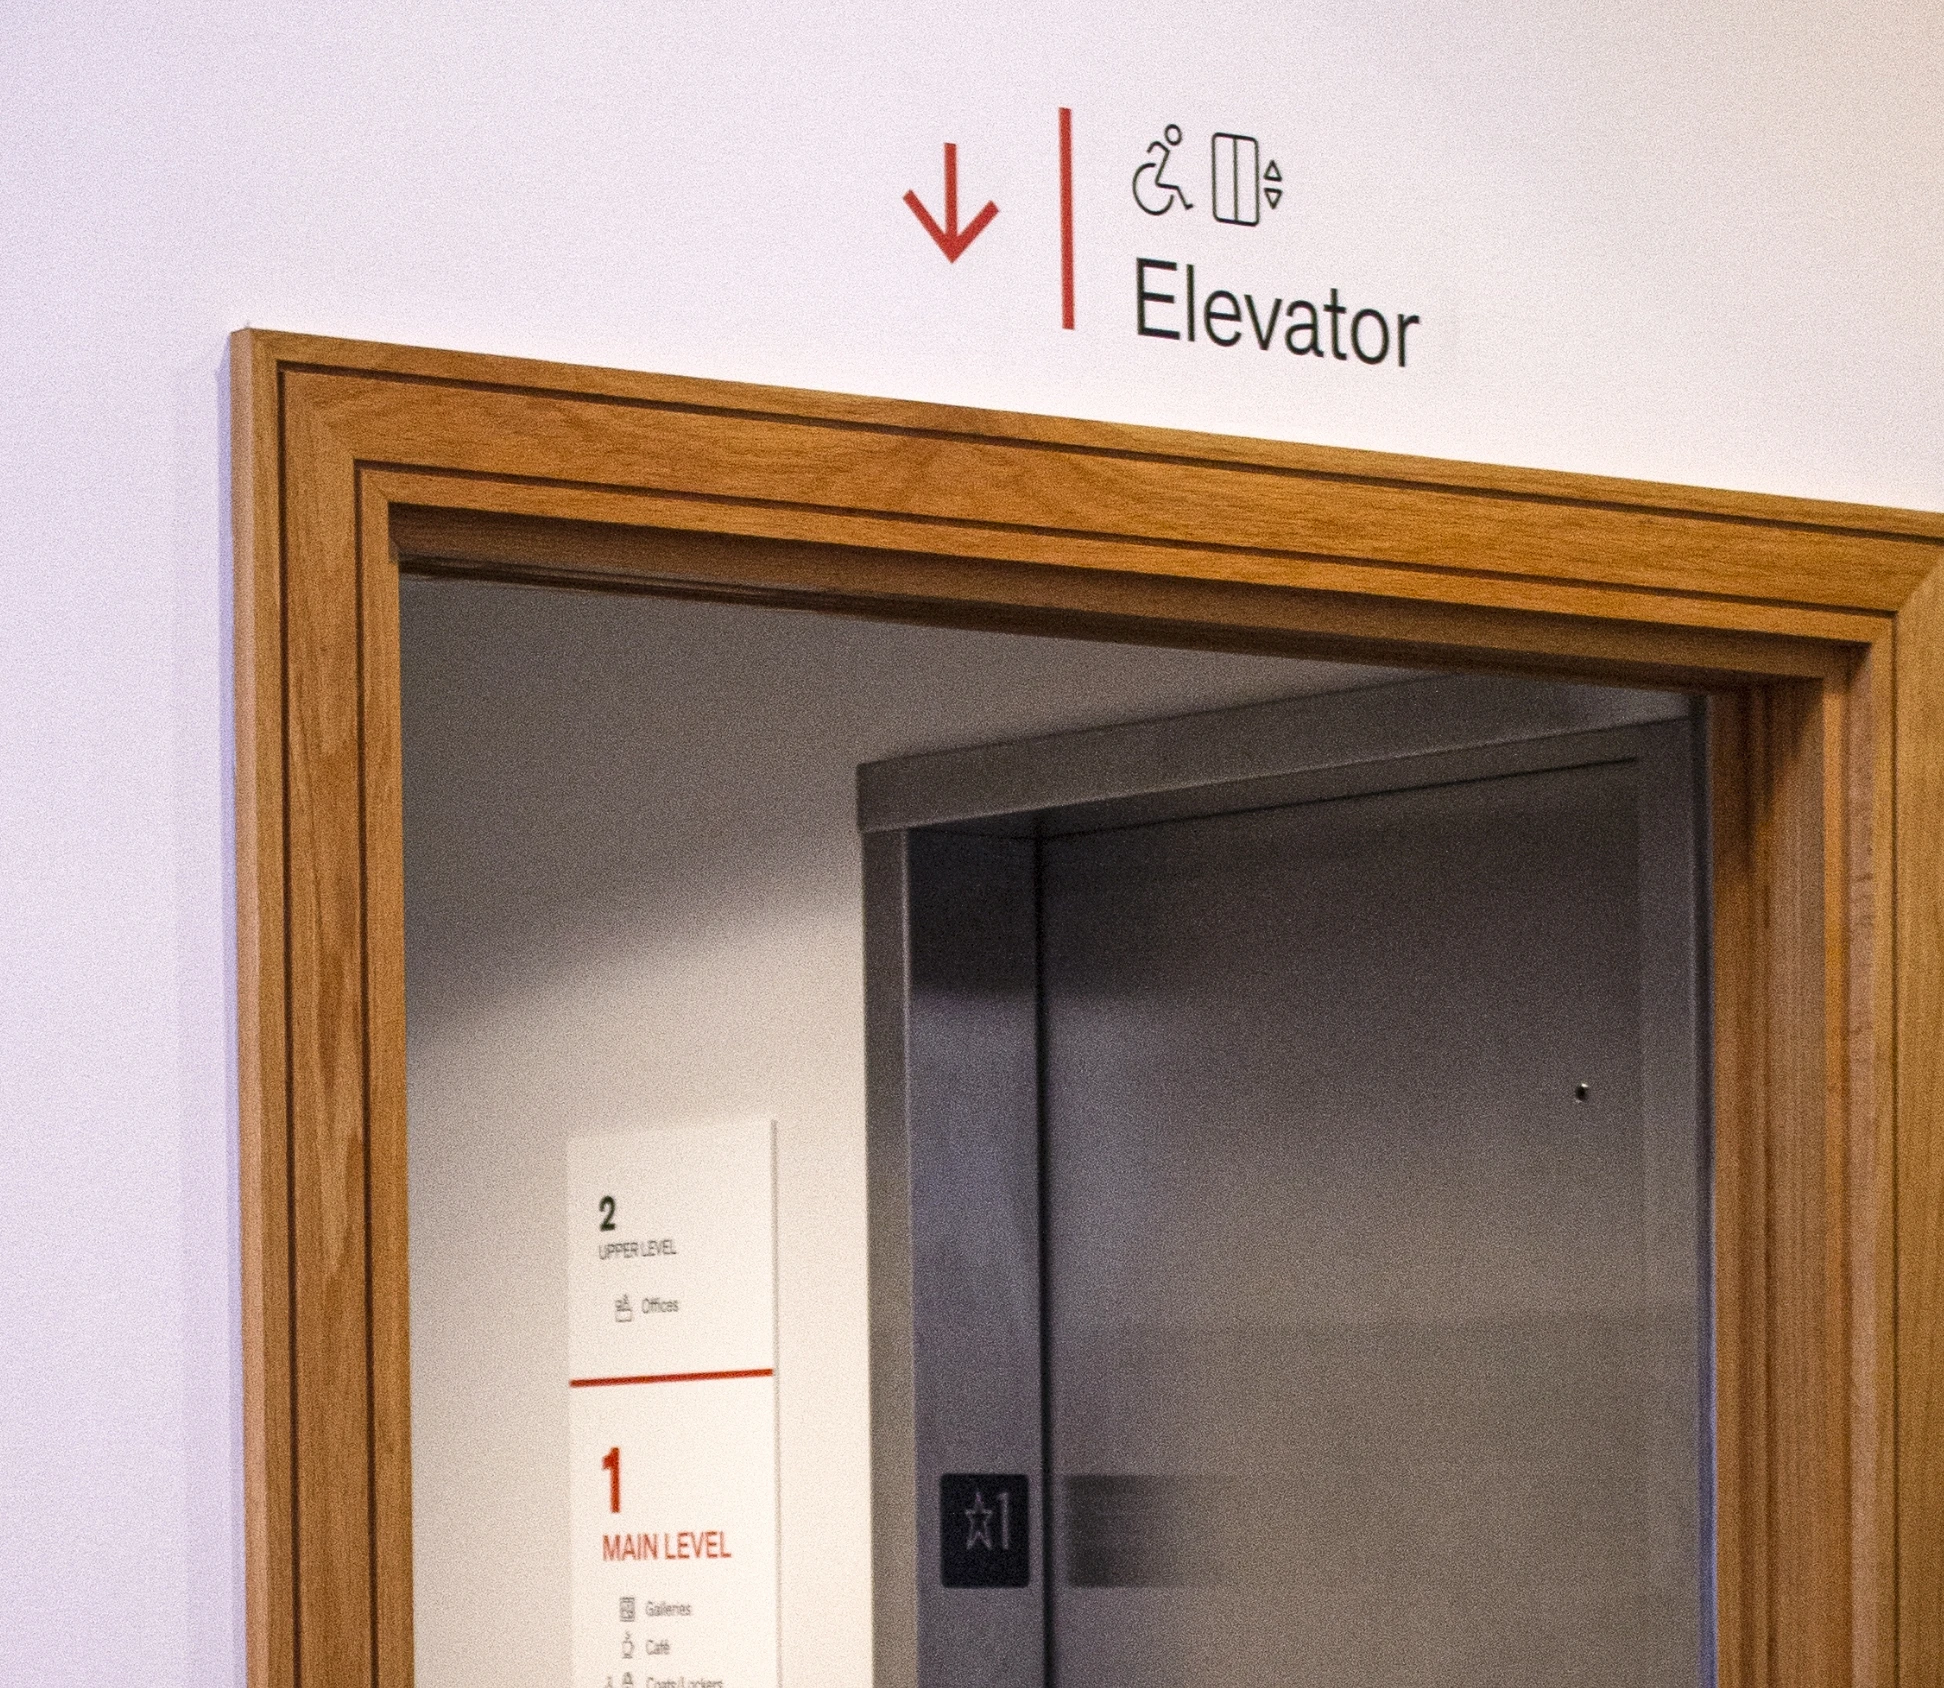 A doorway with an elevator sign on it.